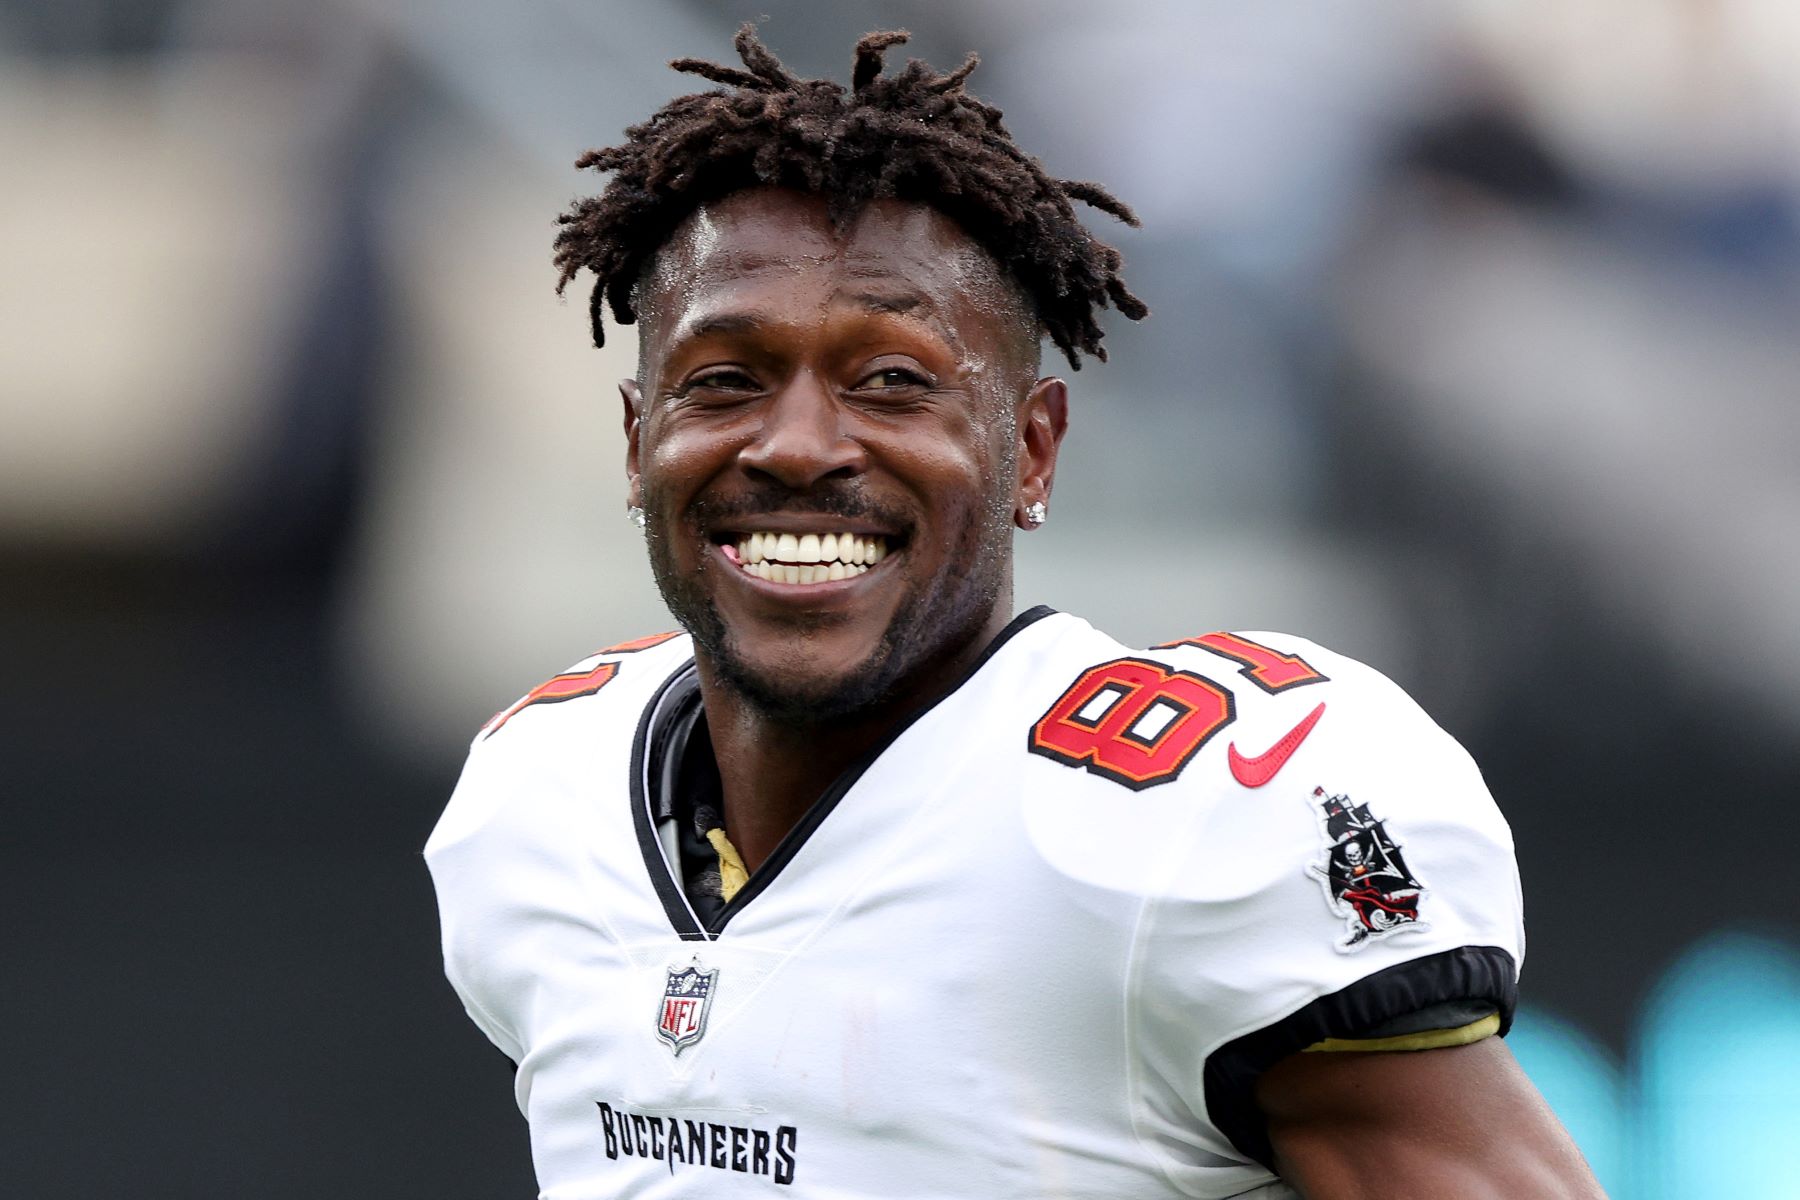 Antonio Brown as #81 on the Tampa Bay Buccaneers NFL team before a game against the New York Jets